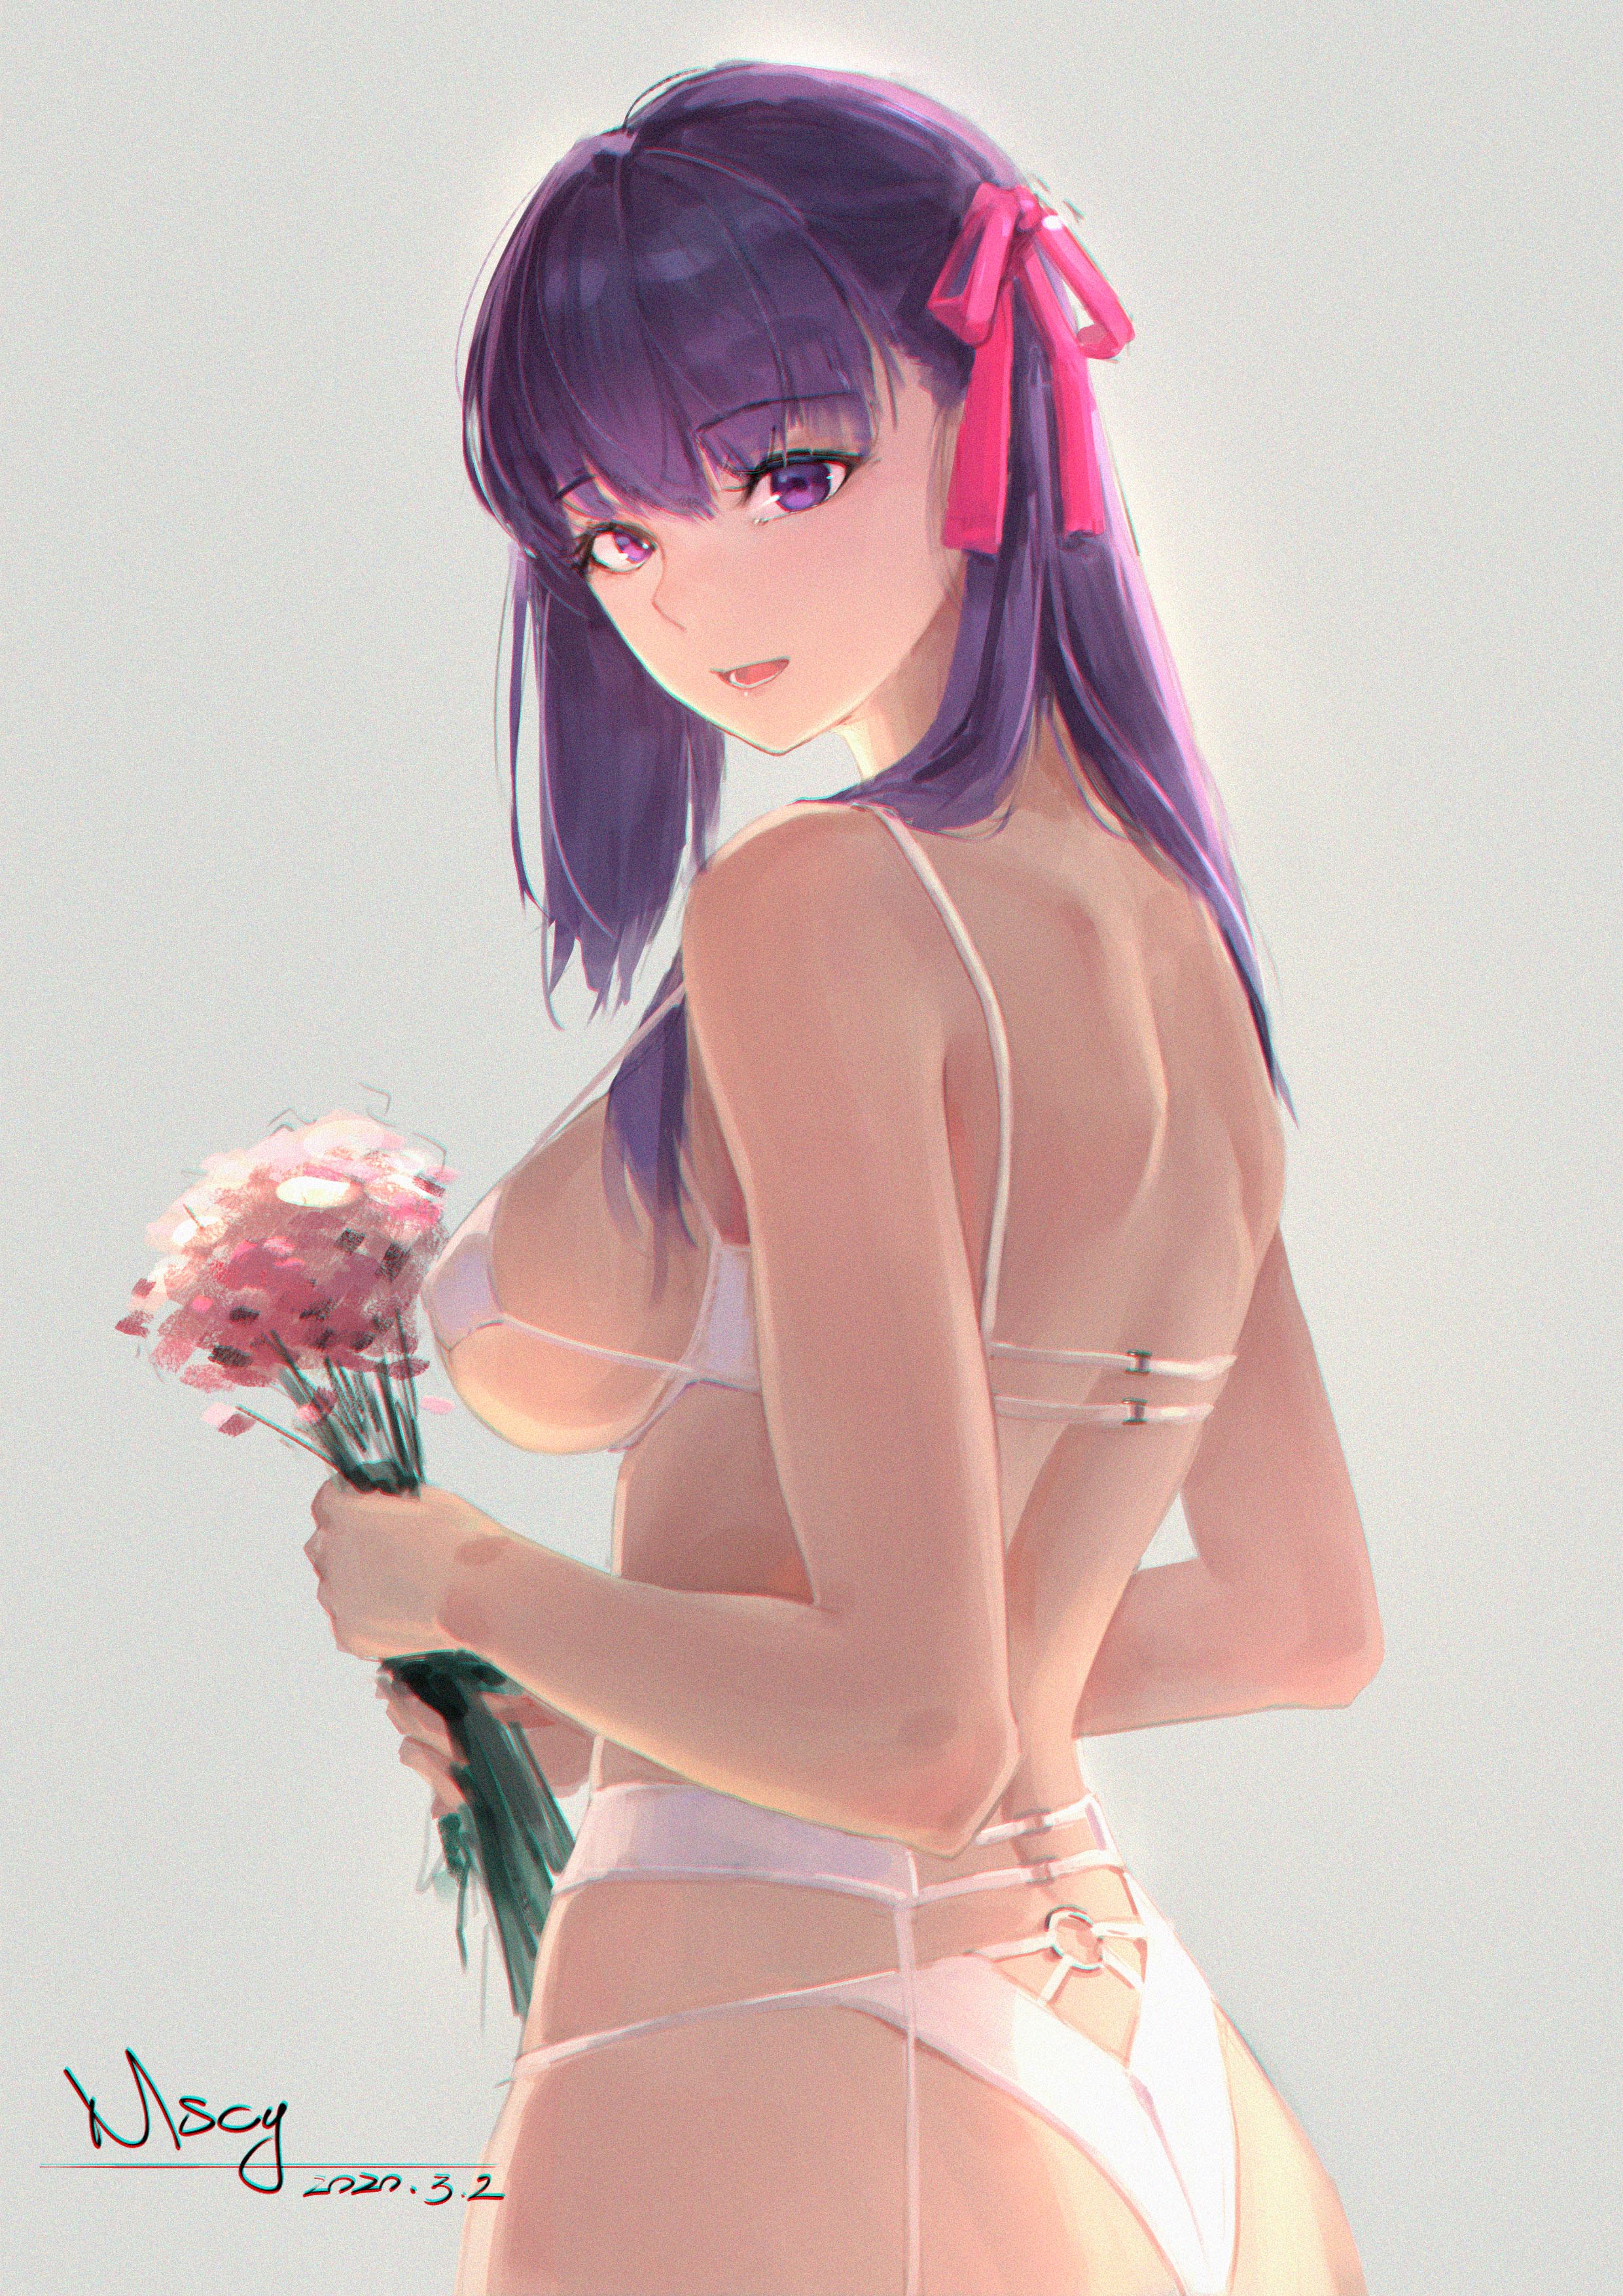 Anime 2480x3508 Fate series Fate/Stay Night fate/stay night: heaven's feel anime girls huge breasts long hair white underwear strings sideboob ecchi curvy ass glutes purple hair looking at viewer open mouth 2D Matou Sakura simple background portrait display purple eyes fan art pink roses bouquet anime